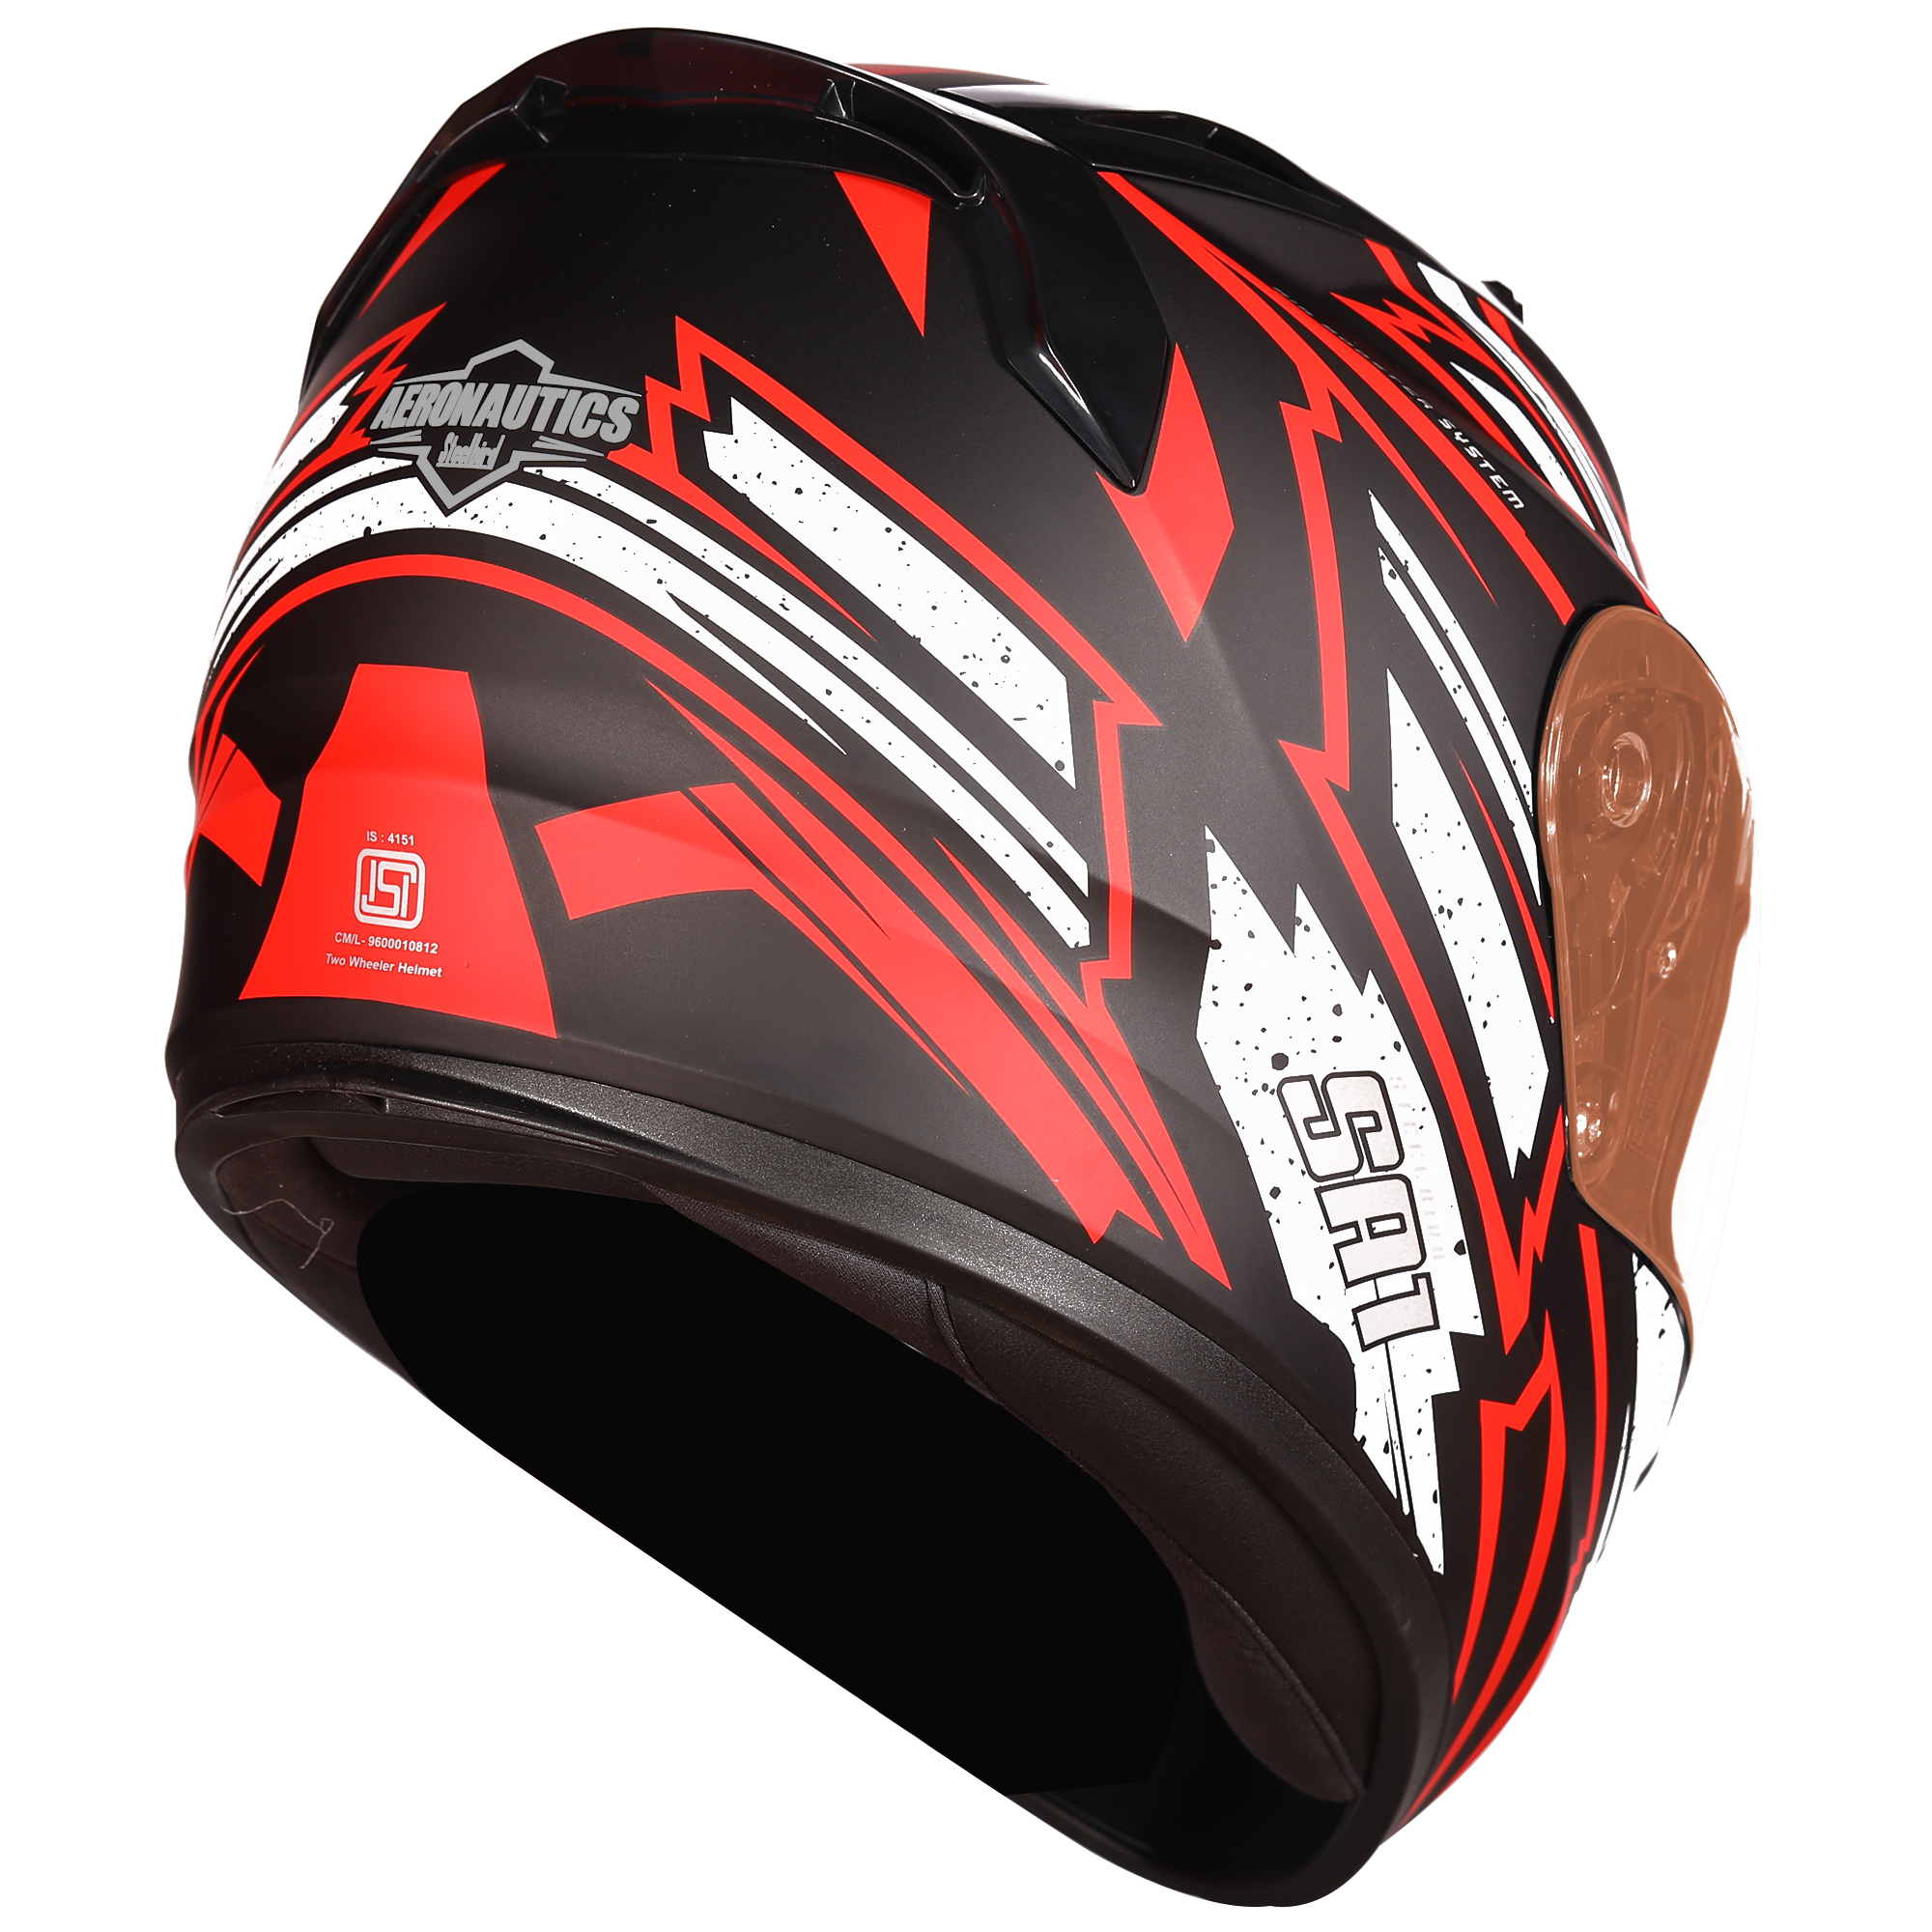 SA-1 BOOSTER MAT BLACK WITH RED - NIGHT VISION GOLD VISOR (WITH EXTRA CLEAR VISOR)